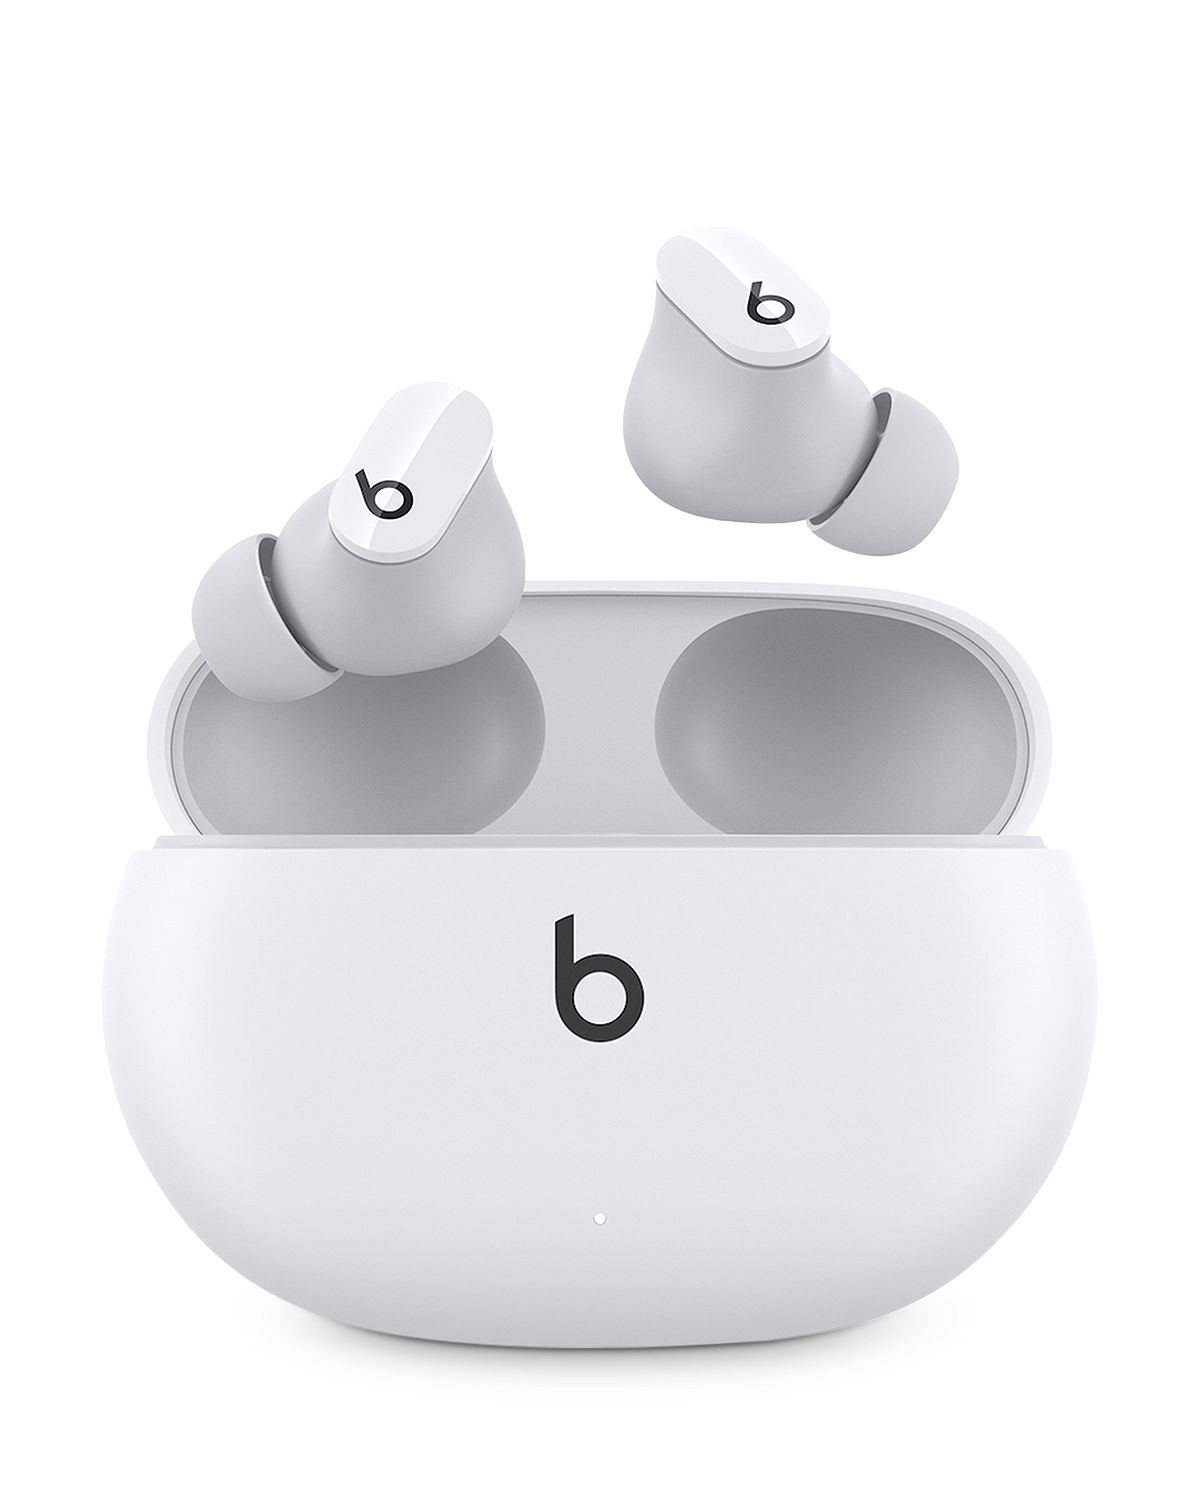 Photo 1 of Beats Studio Buds - True Wireless Noise Cancelling Earbuds - Compatible with Apple & Android, Built-in Microphone, IPX4 Rating, Sweat Resistant Earphones, Class 1 Bluetooth Headphones - White
